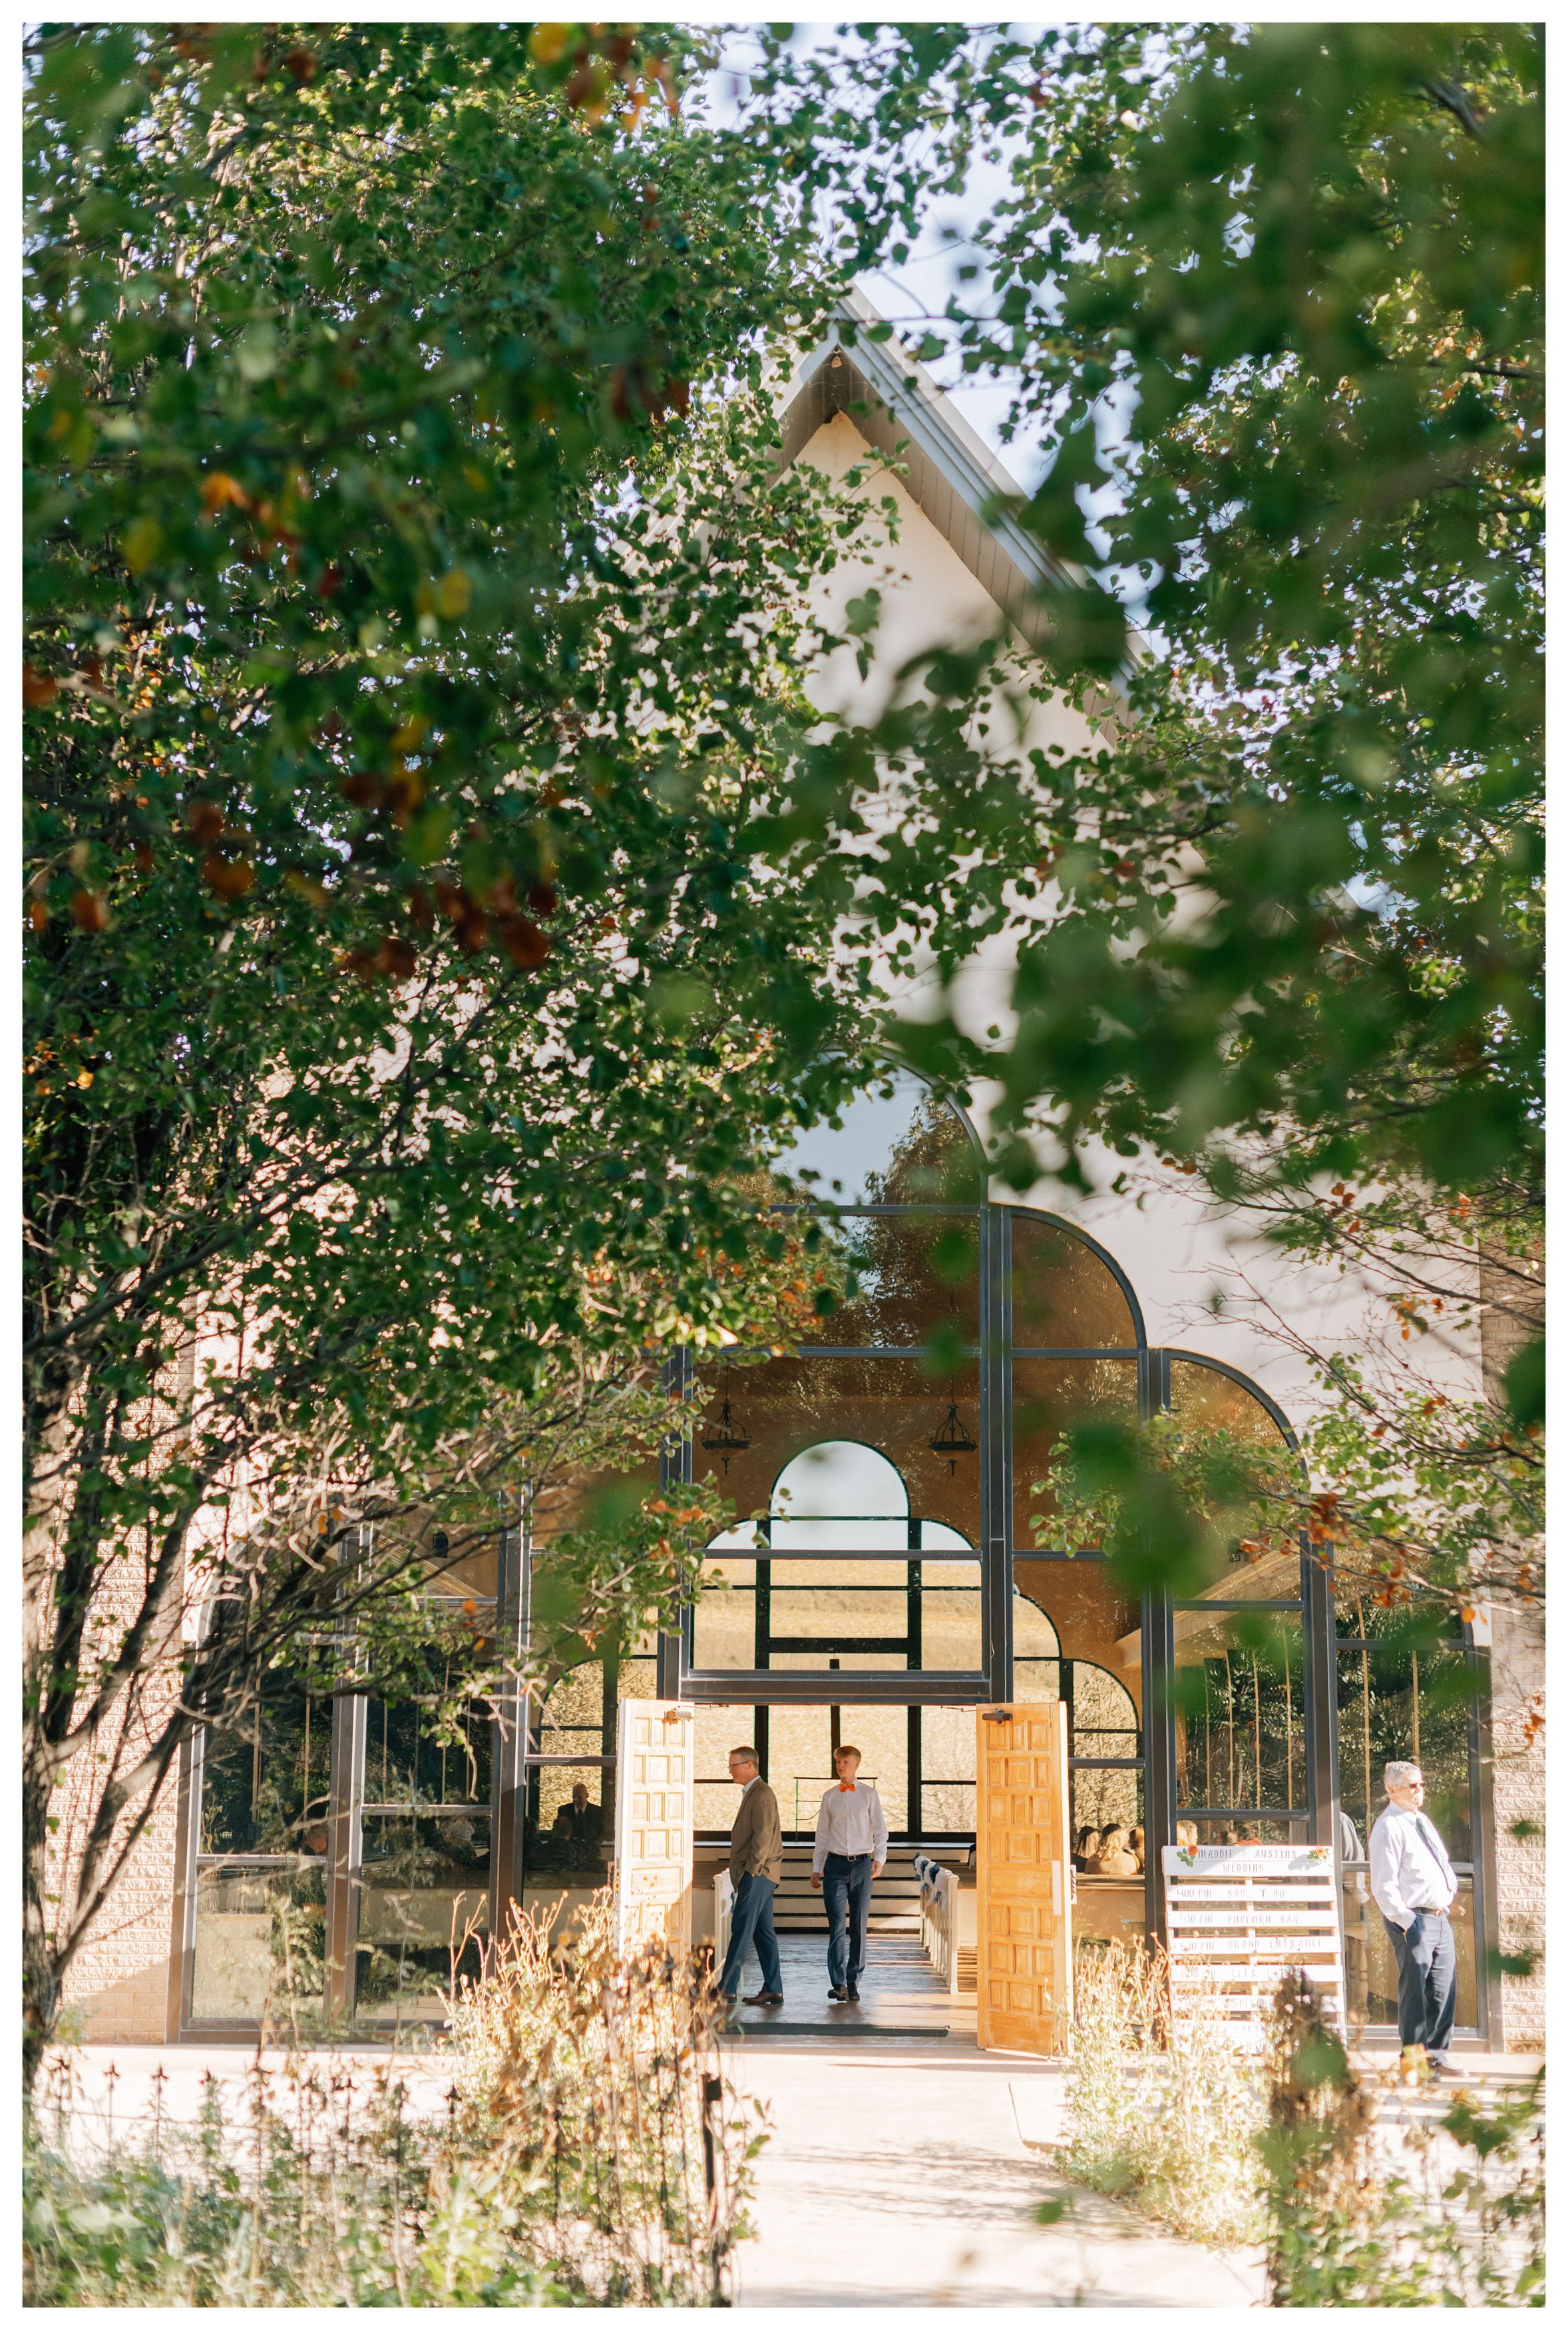 Willow Creek Glass Chapel through the trees in Shelby IA. Photo by Anna Brace, a wedding photographer in Omaha NE. 